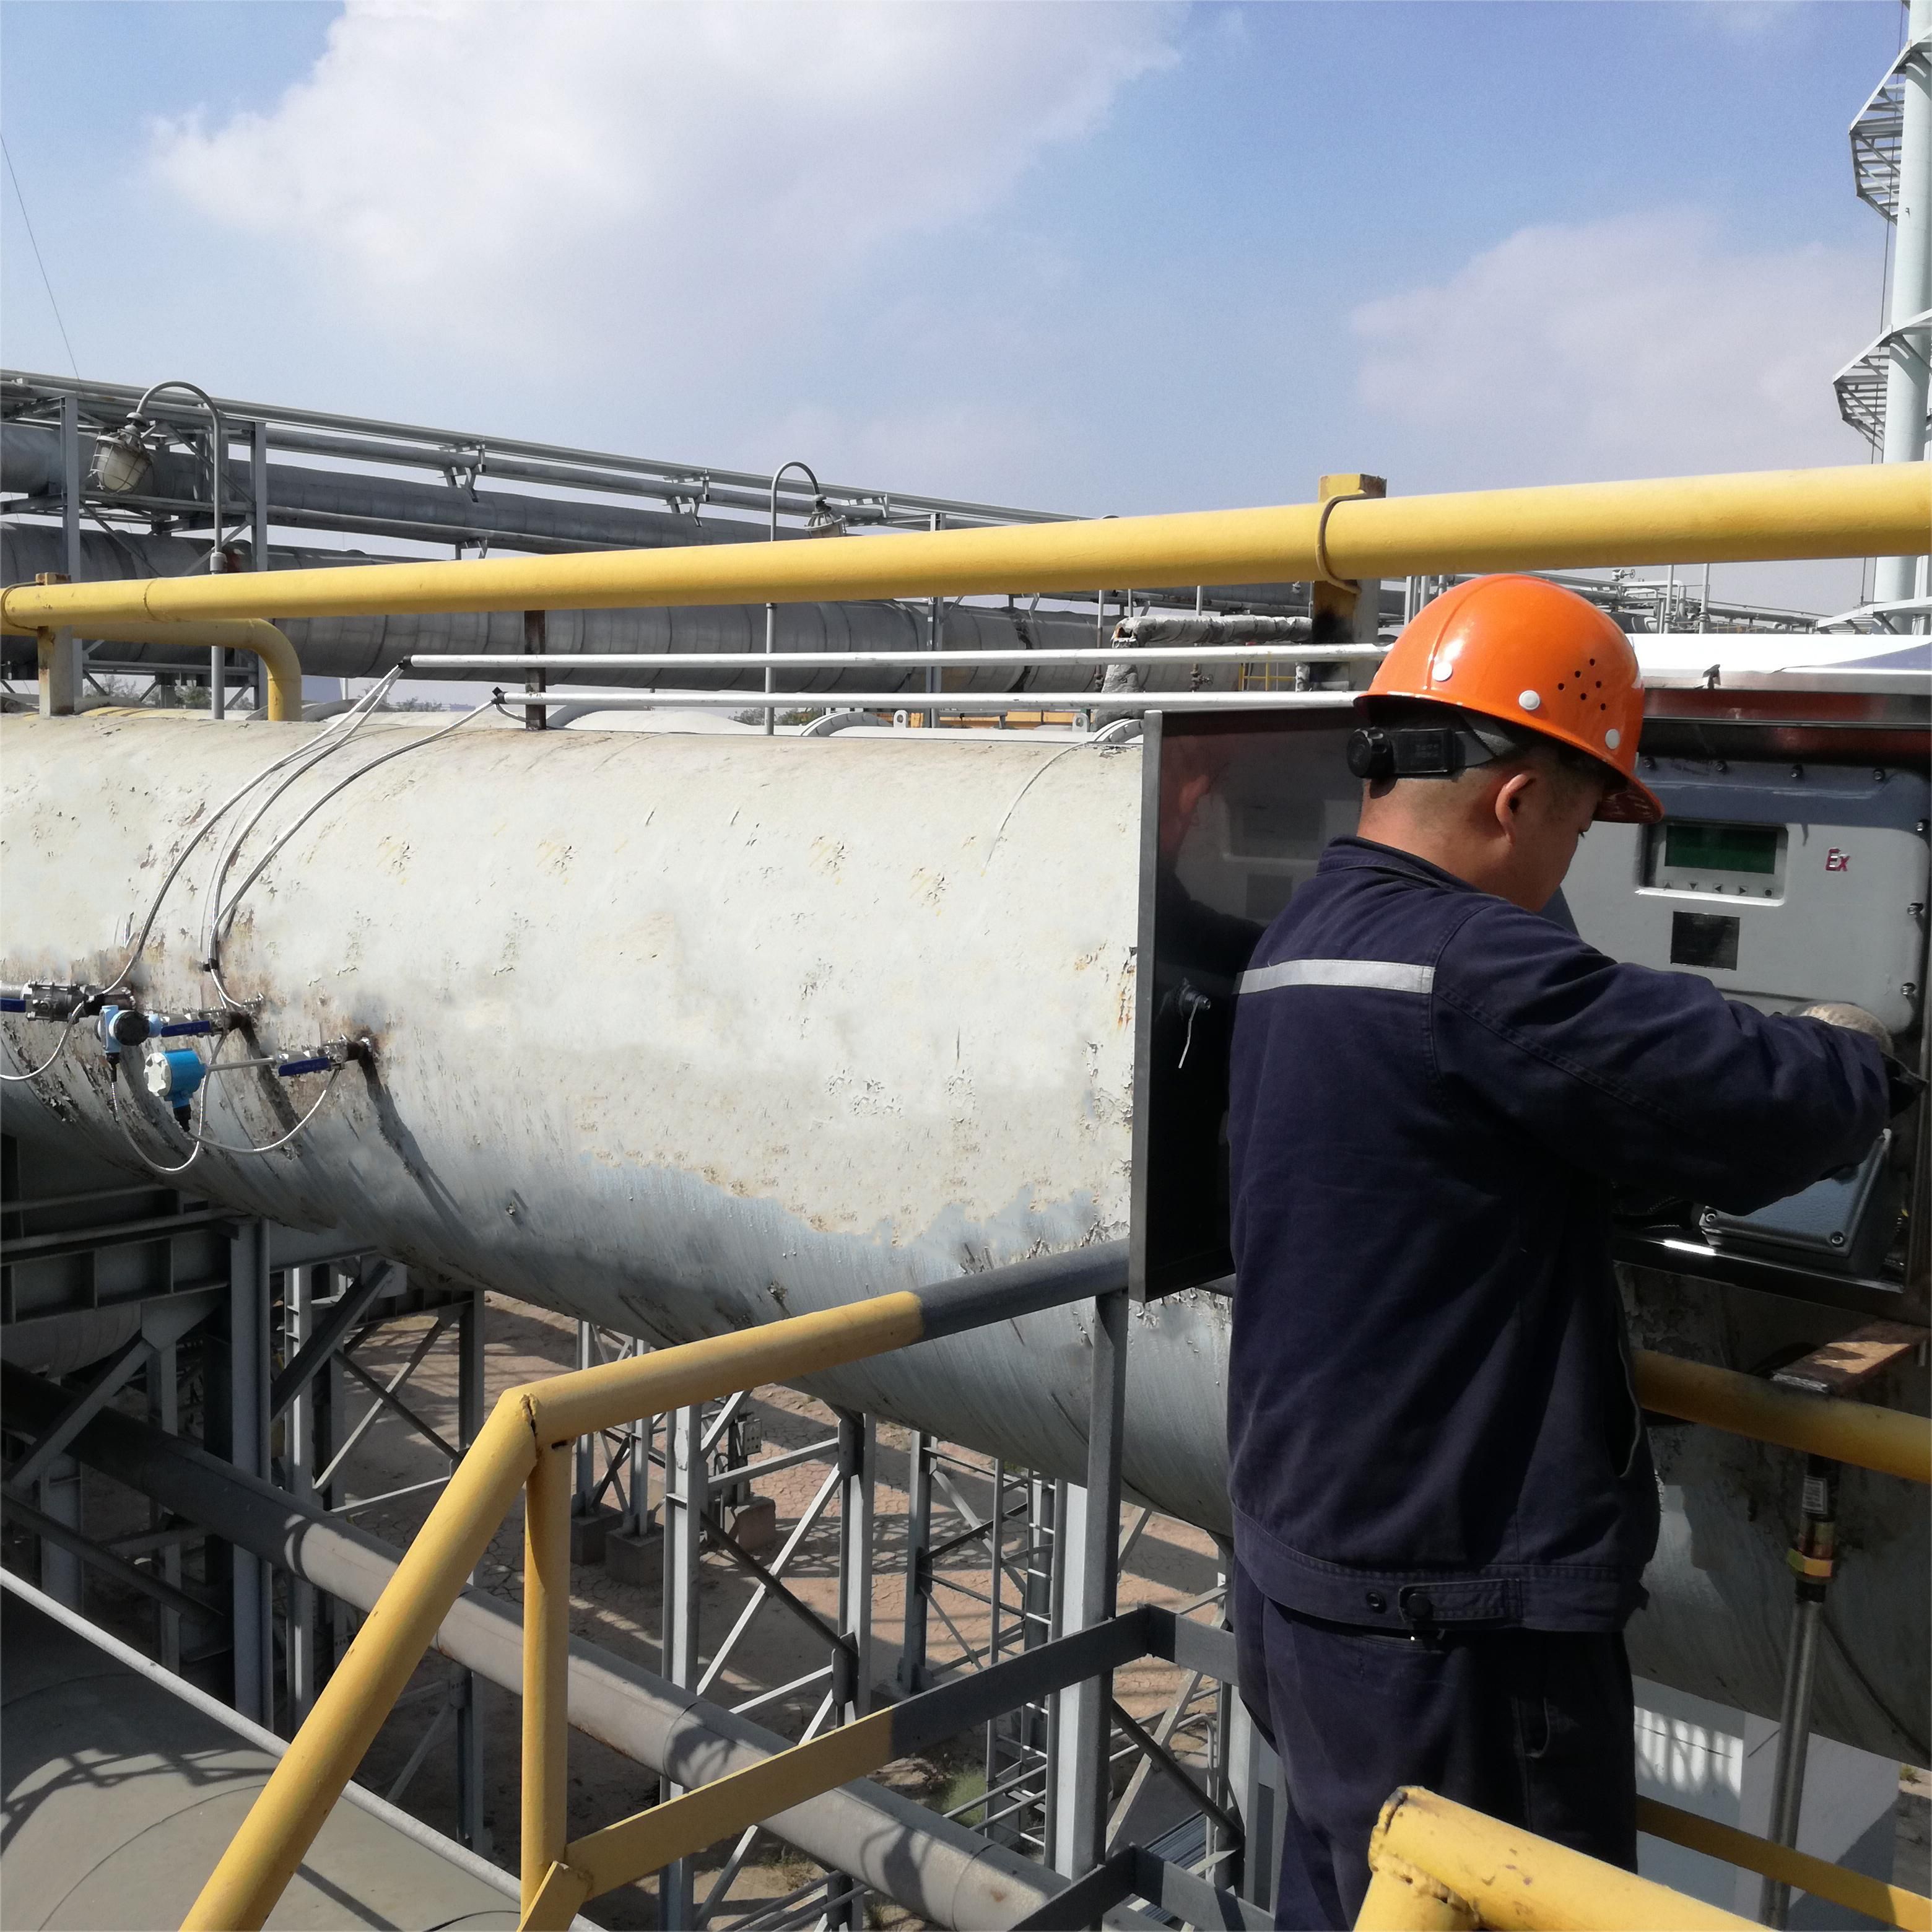 Flue Gas Emission Monitoring-Application of Ultrasonic Flow Meter in Flue Gas Emission Monitoring of Power Plants